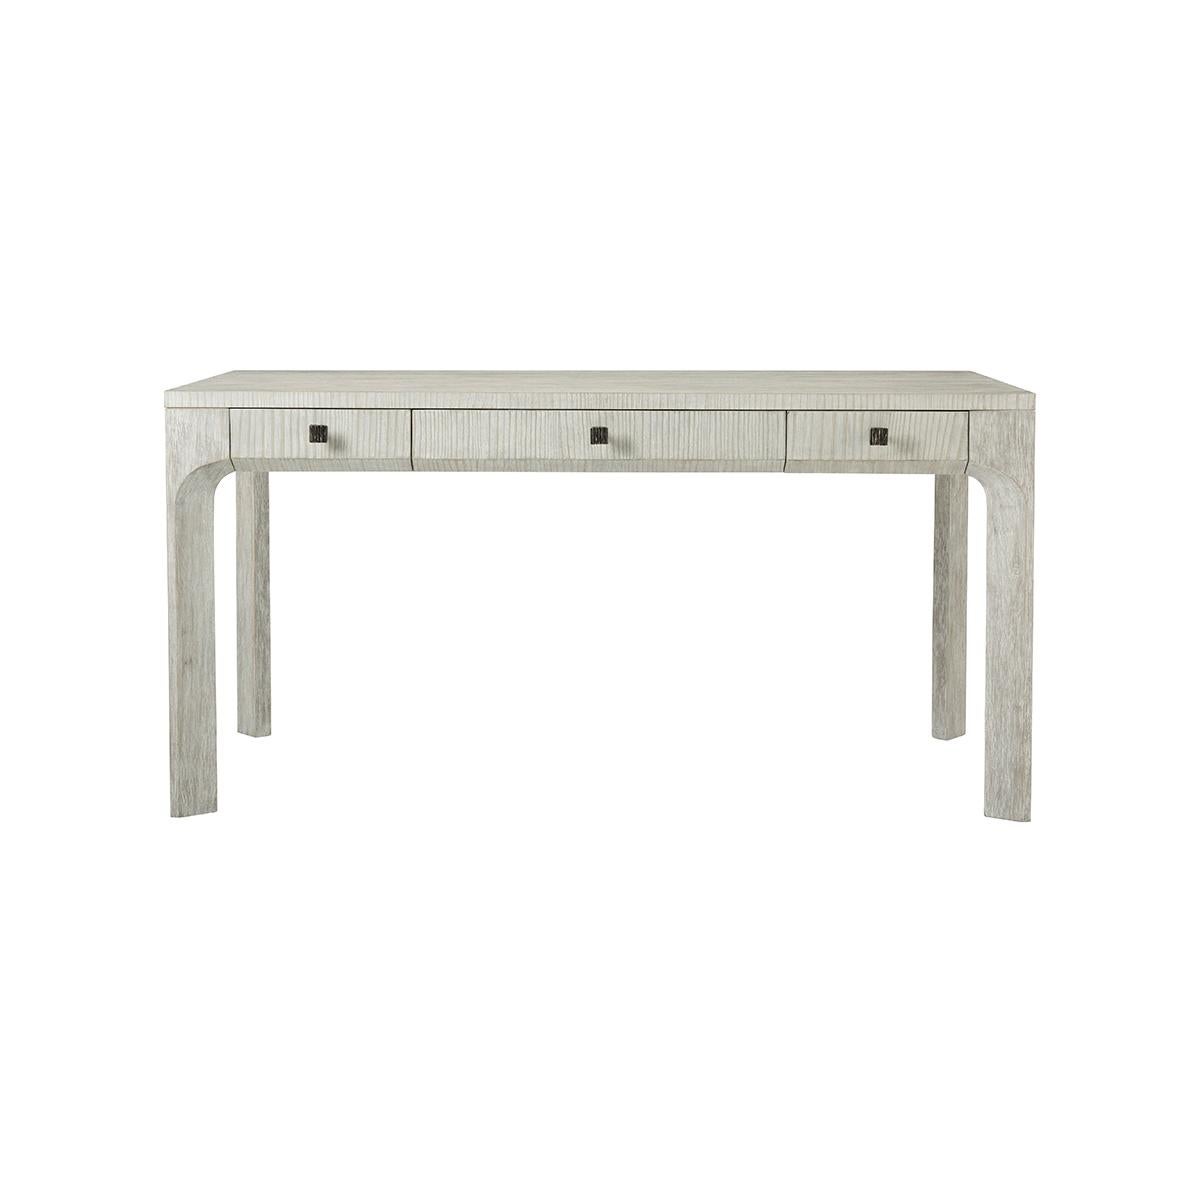 handcrafted wire-brushed cerused pine in a light and subdued Sea Salt finish, the desk displays three functional drawers with organic ribbed metal knobs in our Dark Sterling finish and a beveled-shaped cross-section.

Dimensions: 60